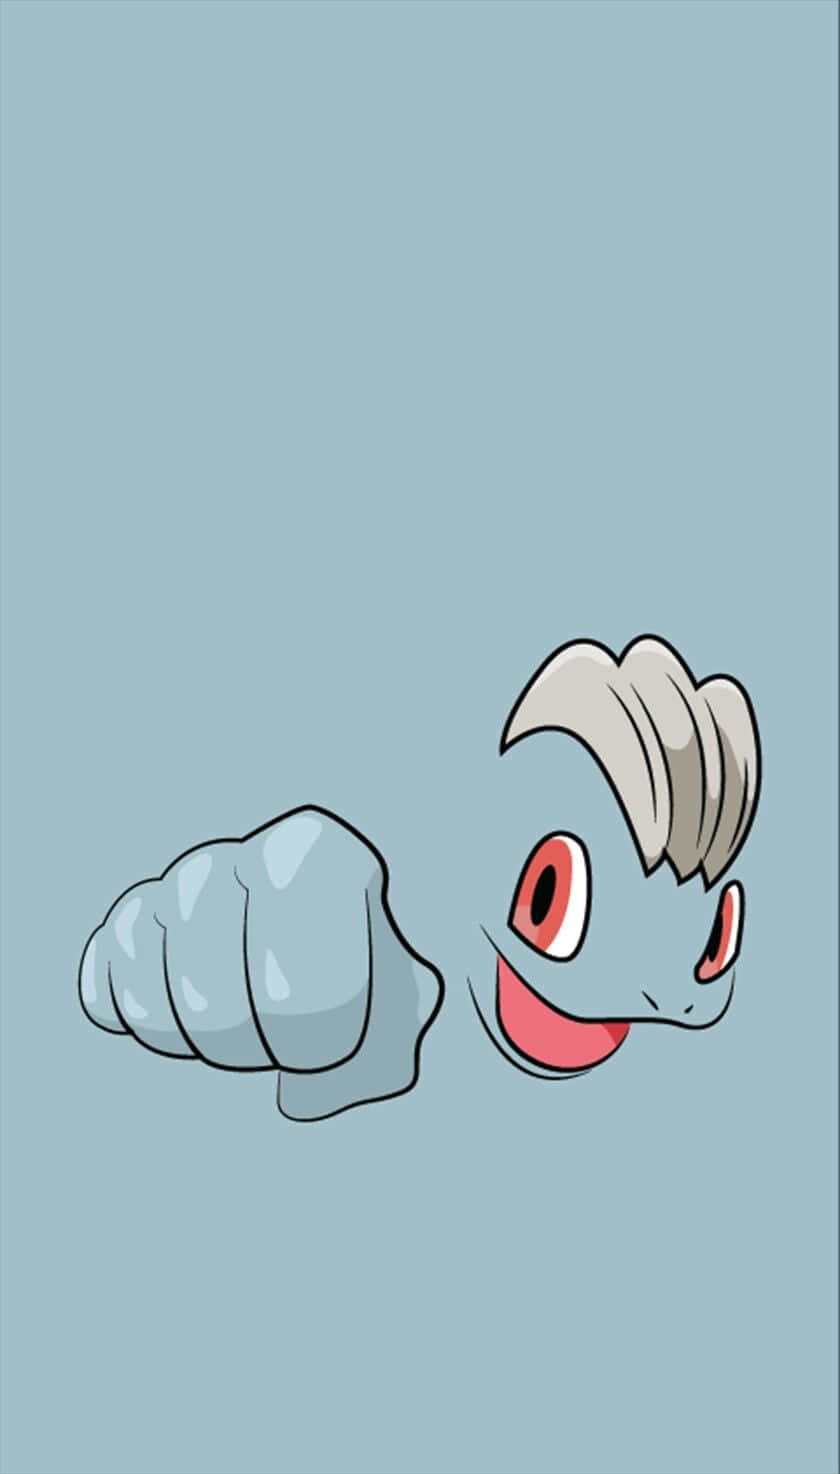 Machop With Oncoming Fist Illustration Wallpaper